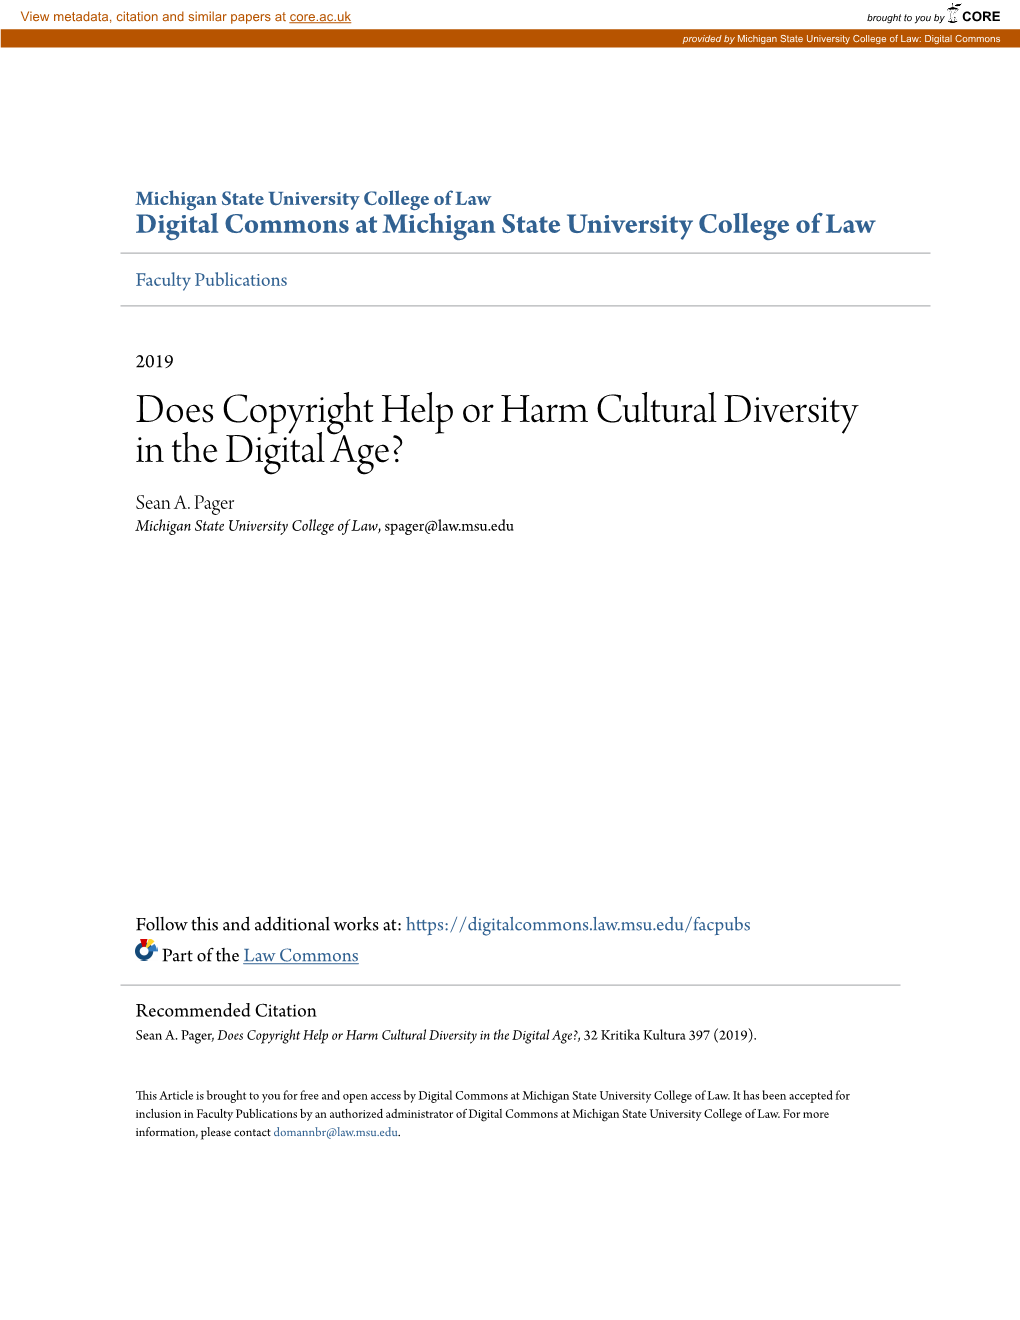 Does Copyright Help Or Harm Cultural Diversity in the Digital Age? Sean A